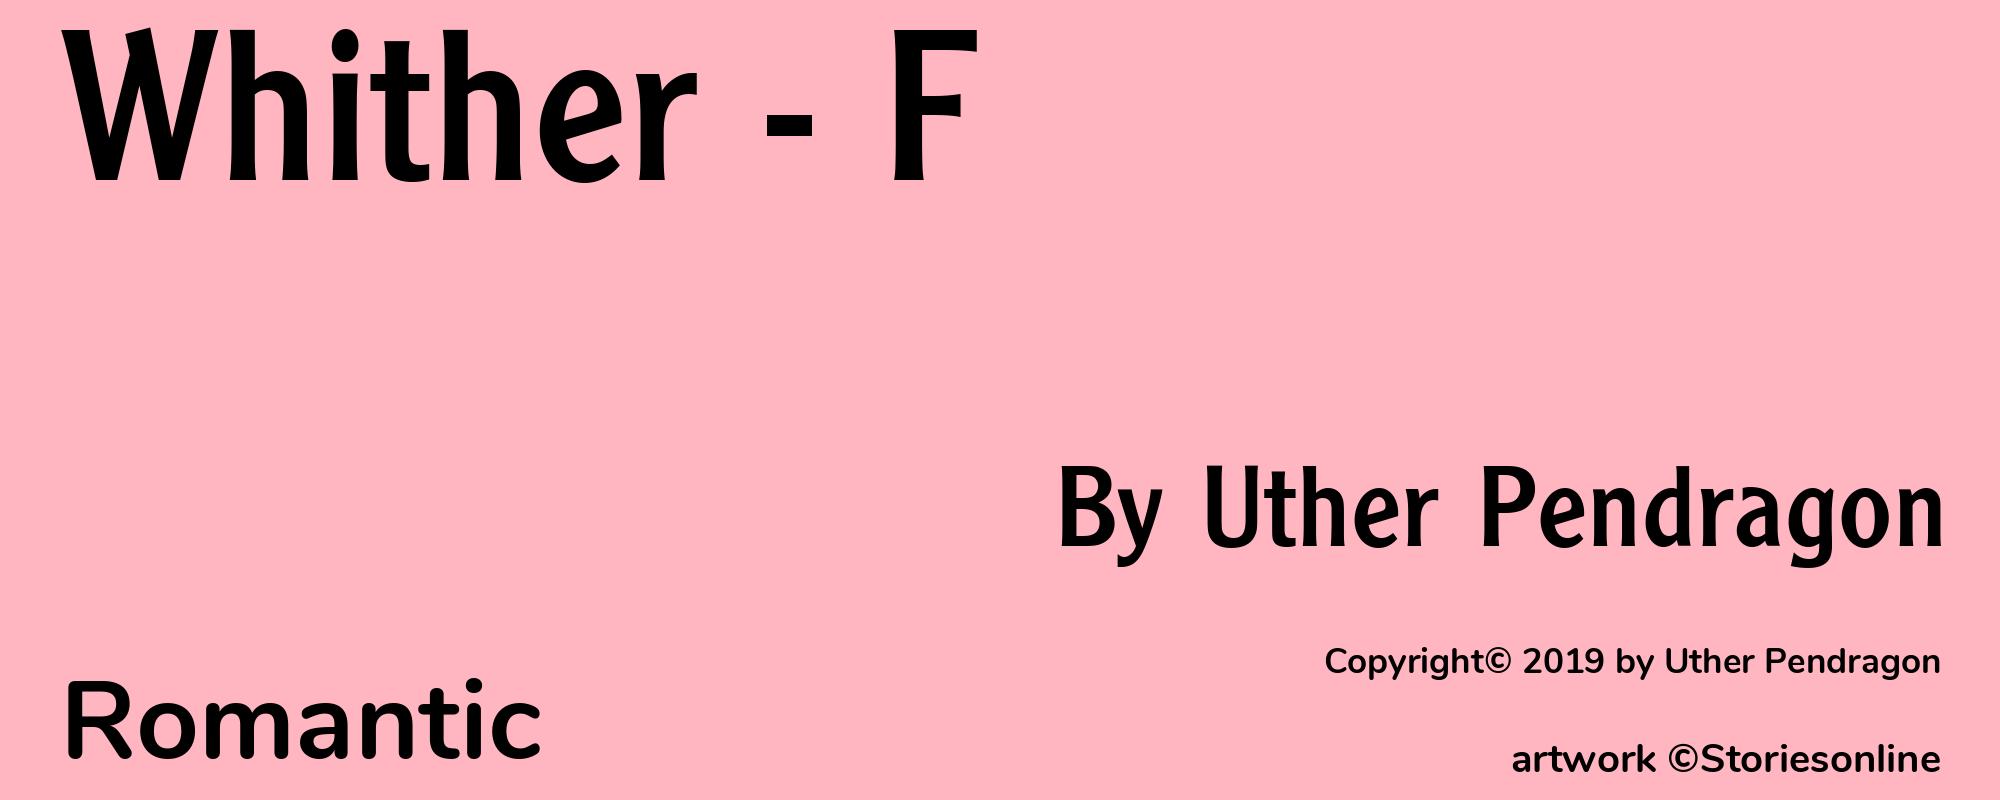 Whither - F - Cover